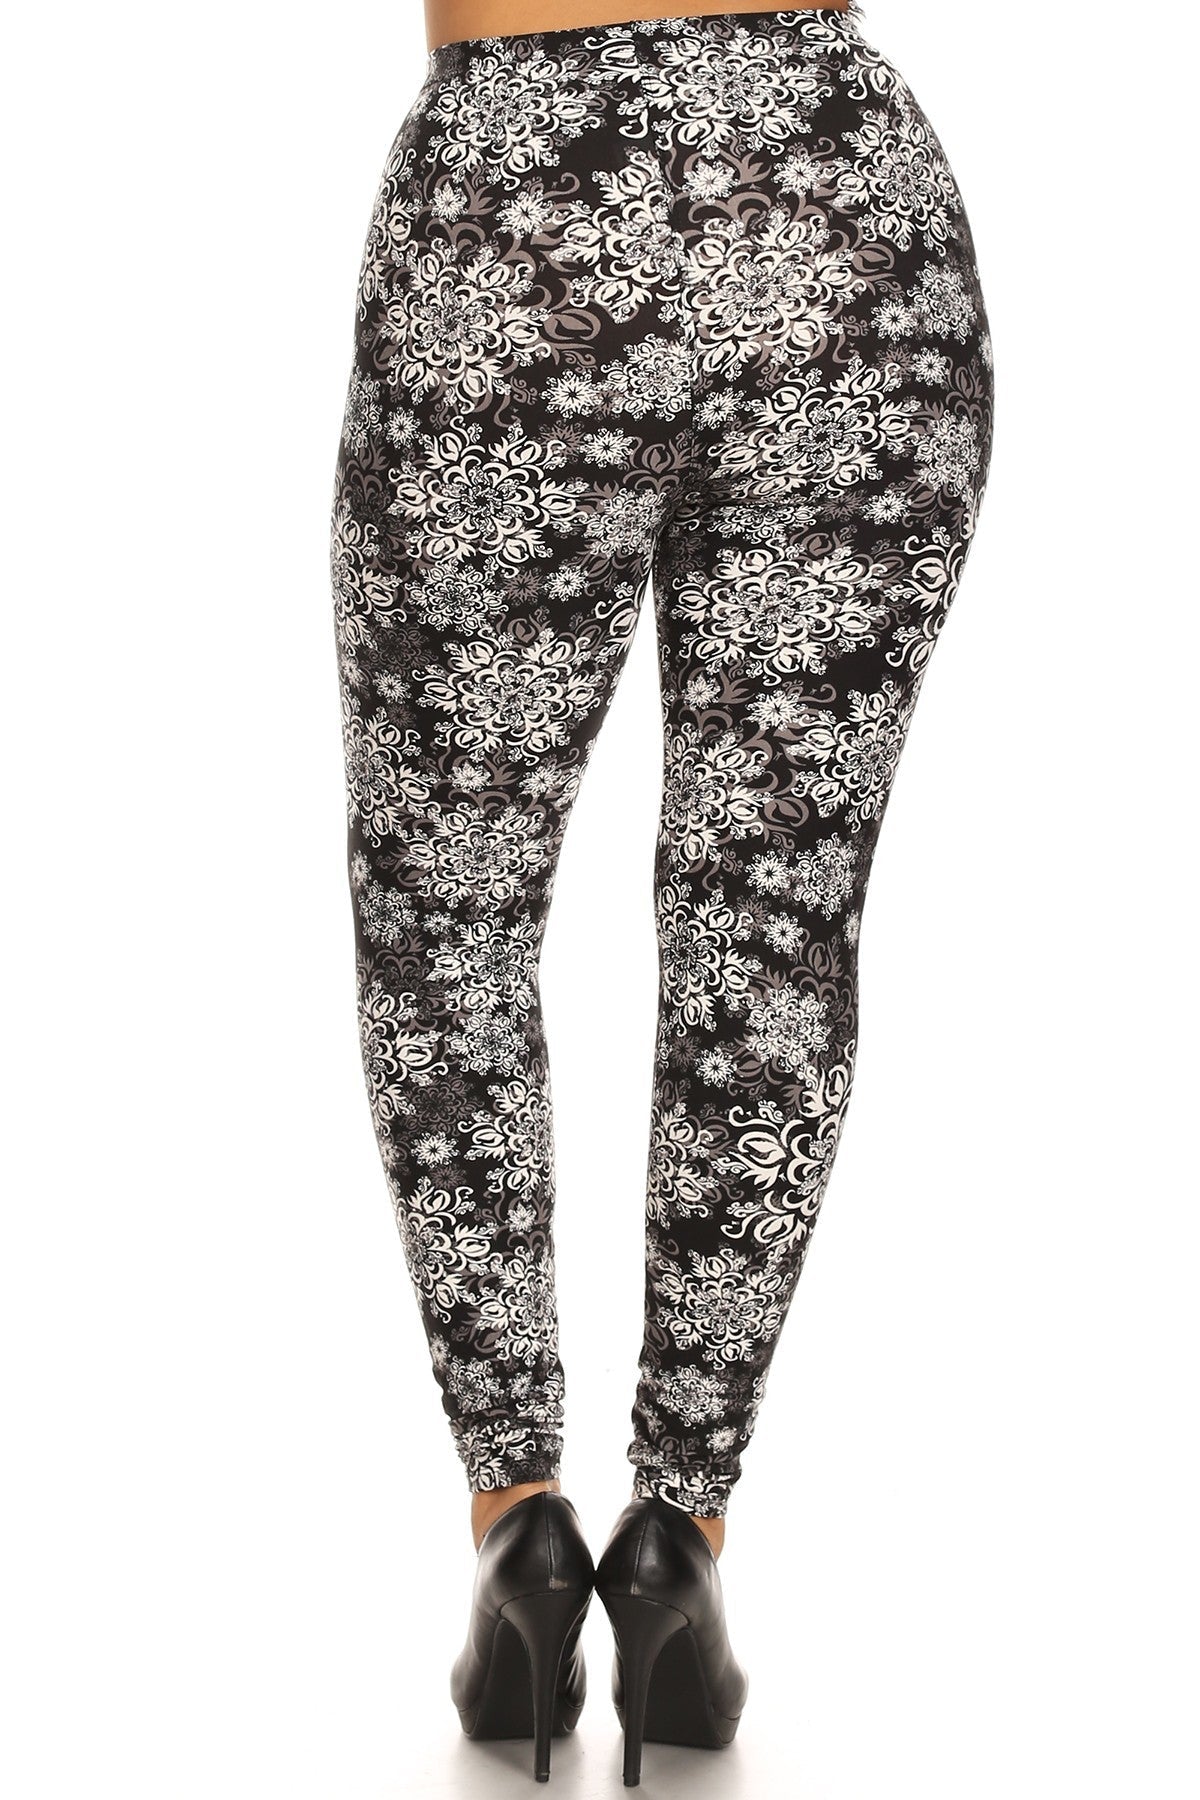 Plus Size Abstract Print, Full Length Leggings In A Slim Fitting Style With A Banded High Waist Smile Sparker